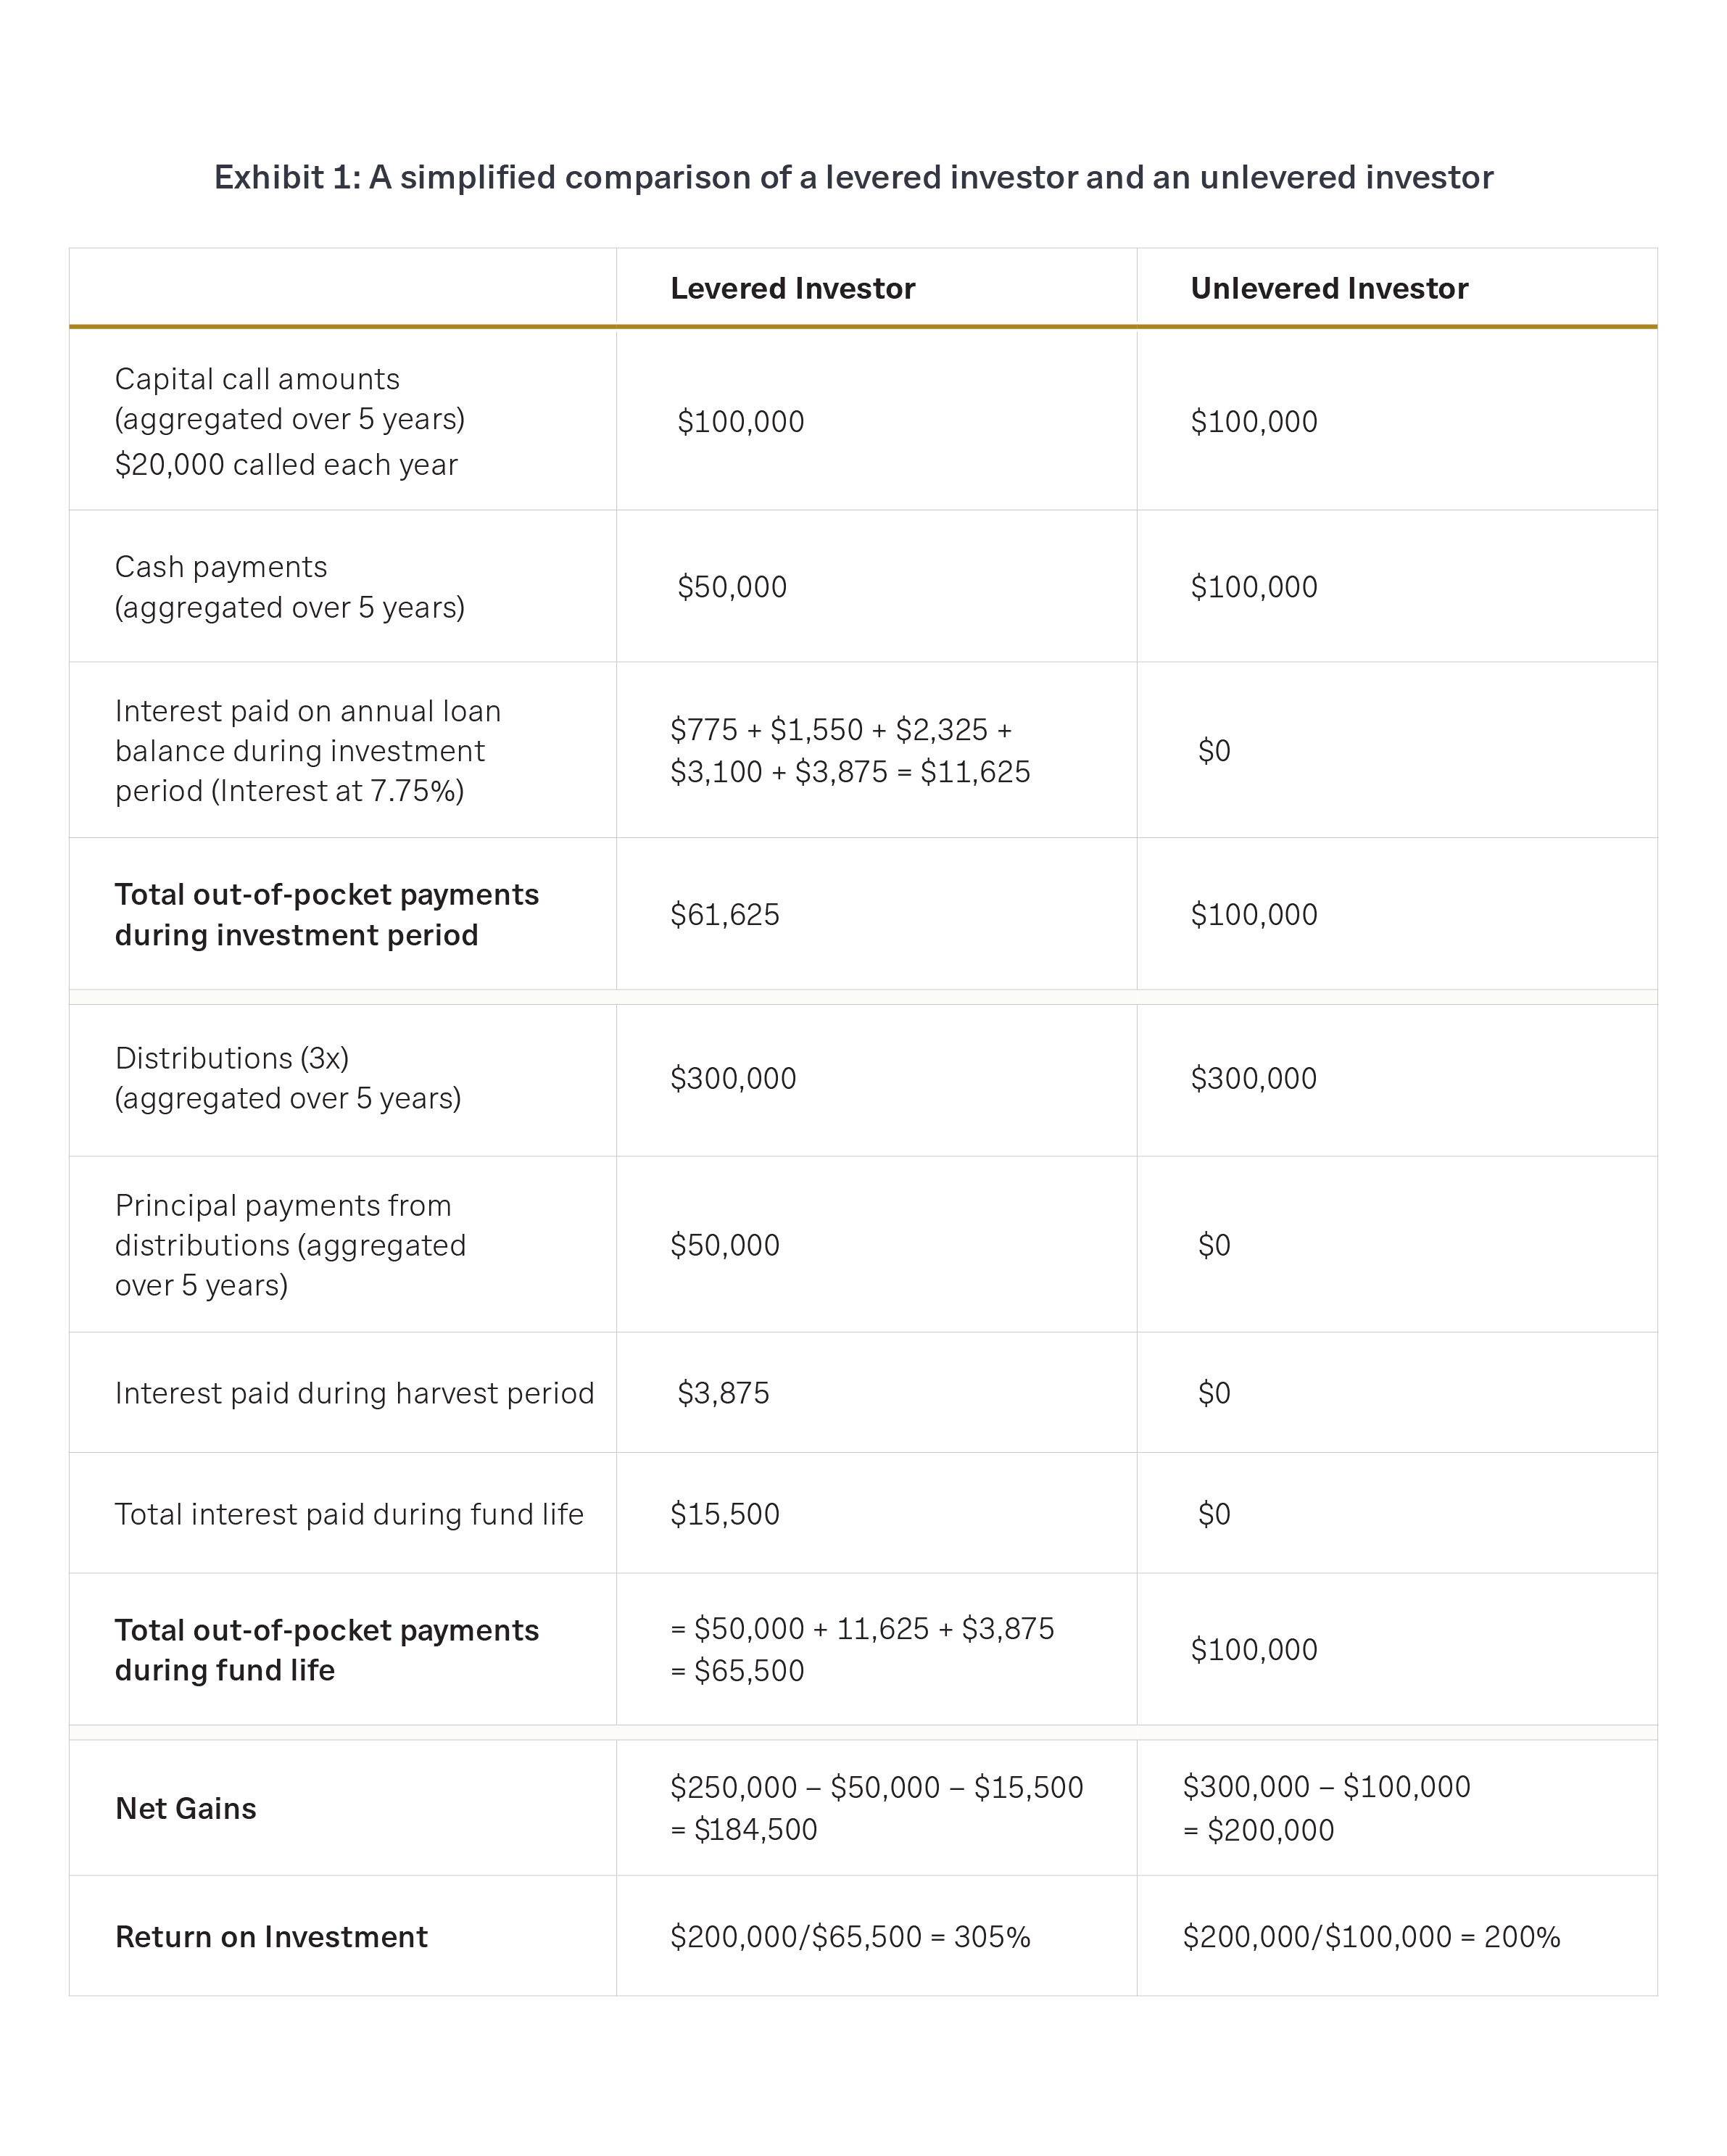 This table is a comparison of the return on investment for a levered versus an unlevered investor in a scenarios where the borrower who uses leverage to fund their capital commitments conserves their personal liquidity and delivers a higher return on investment than their unlevered colleague, all things being equal.